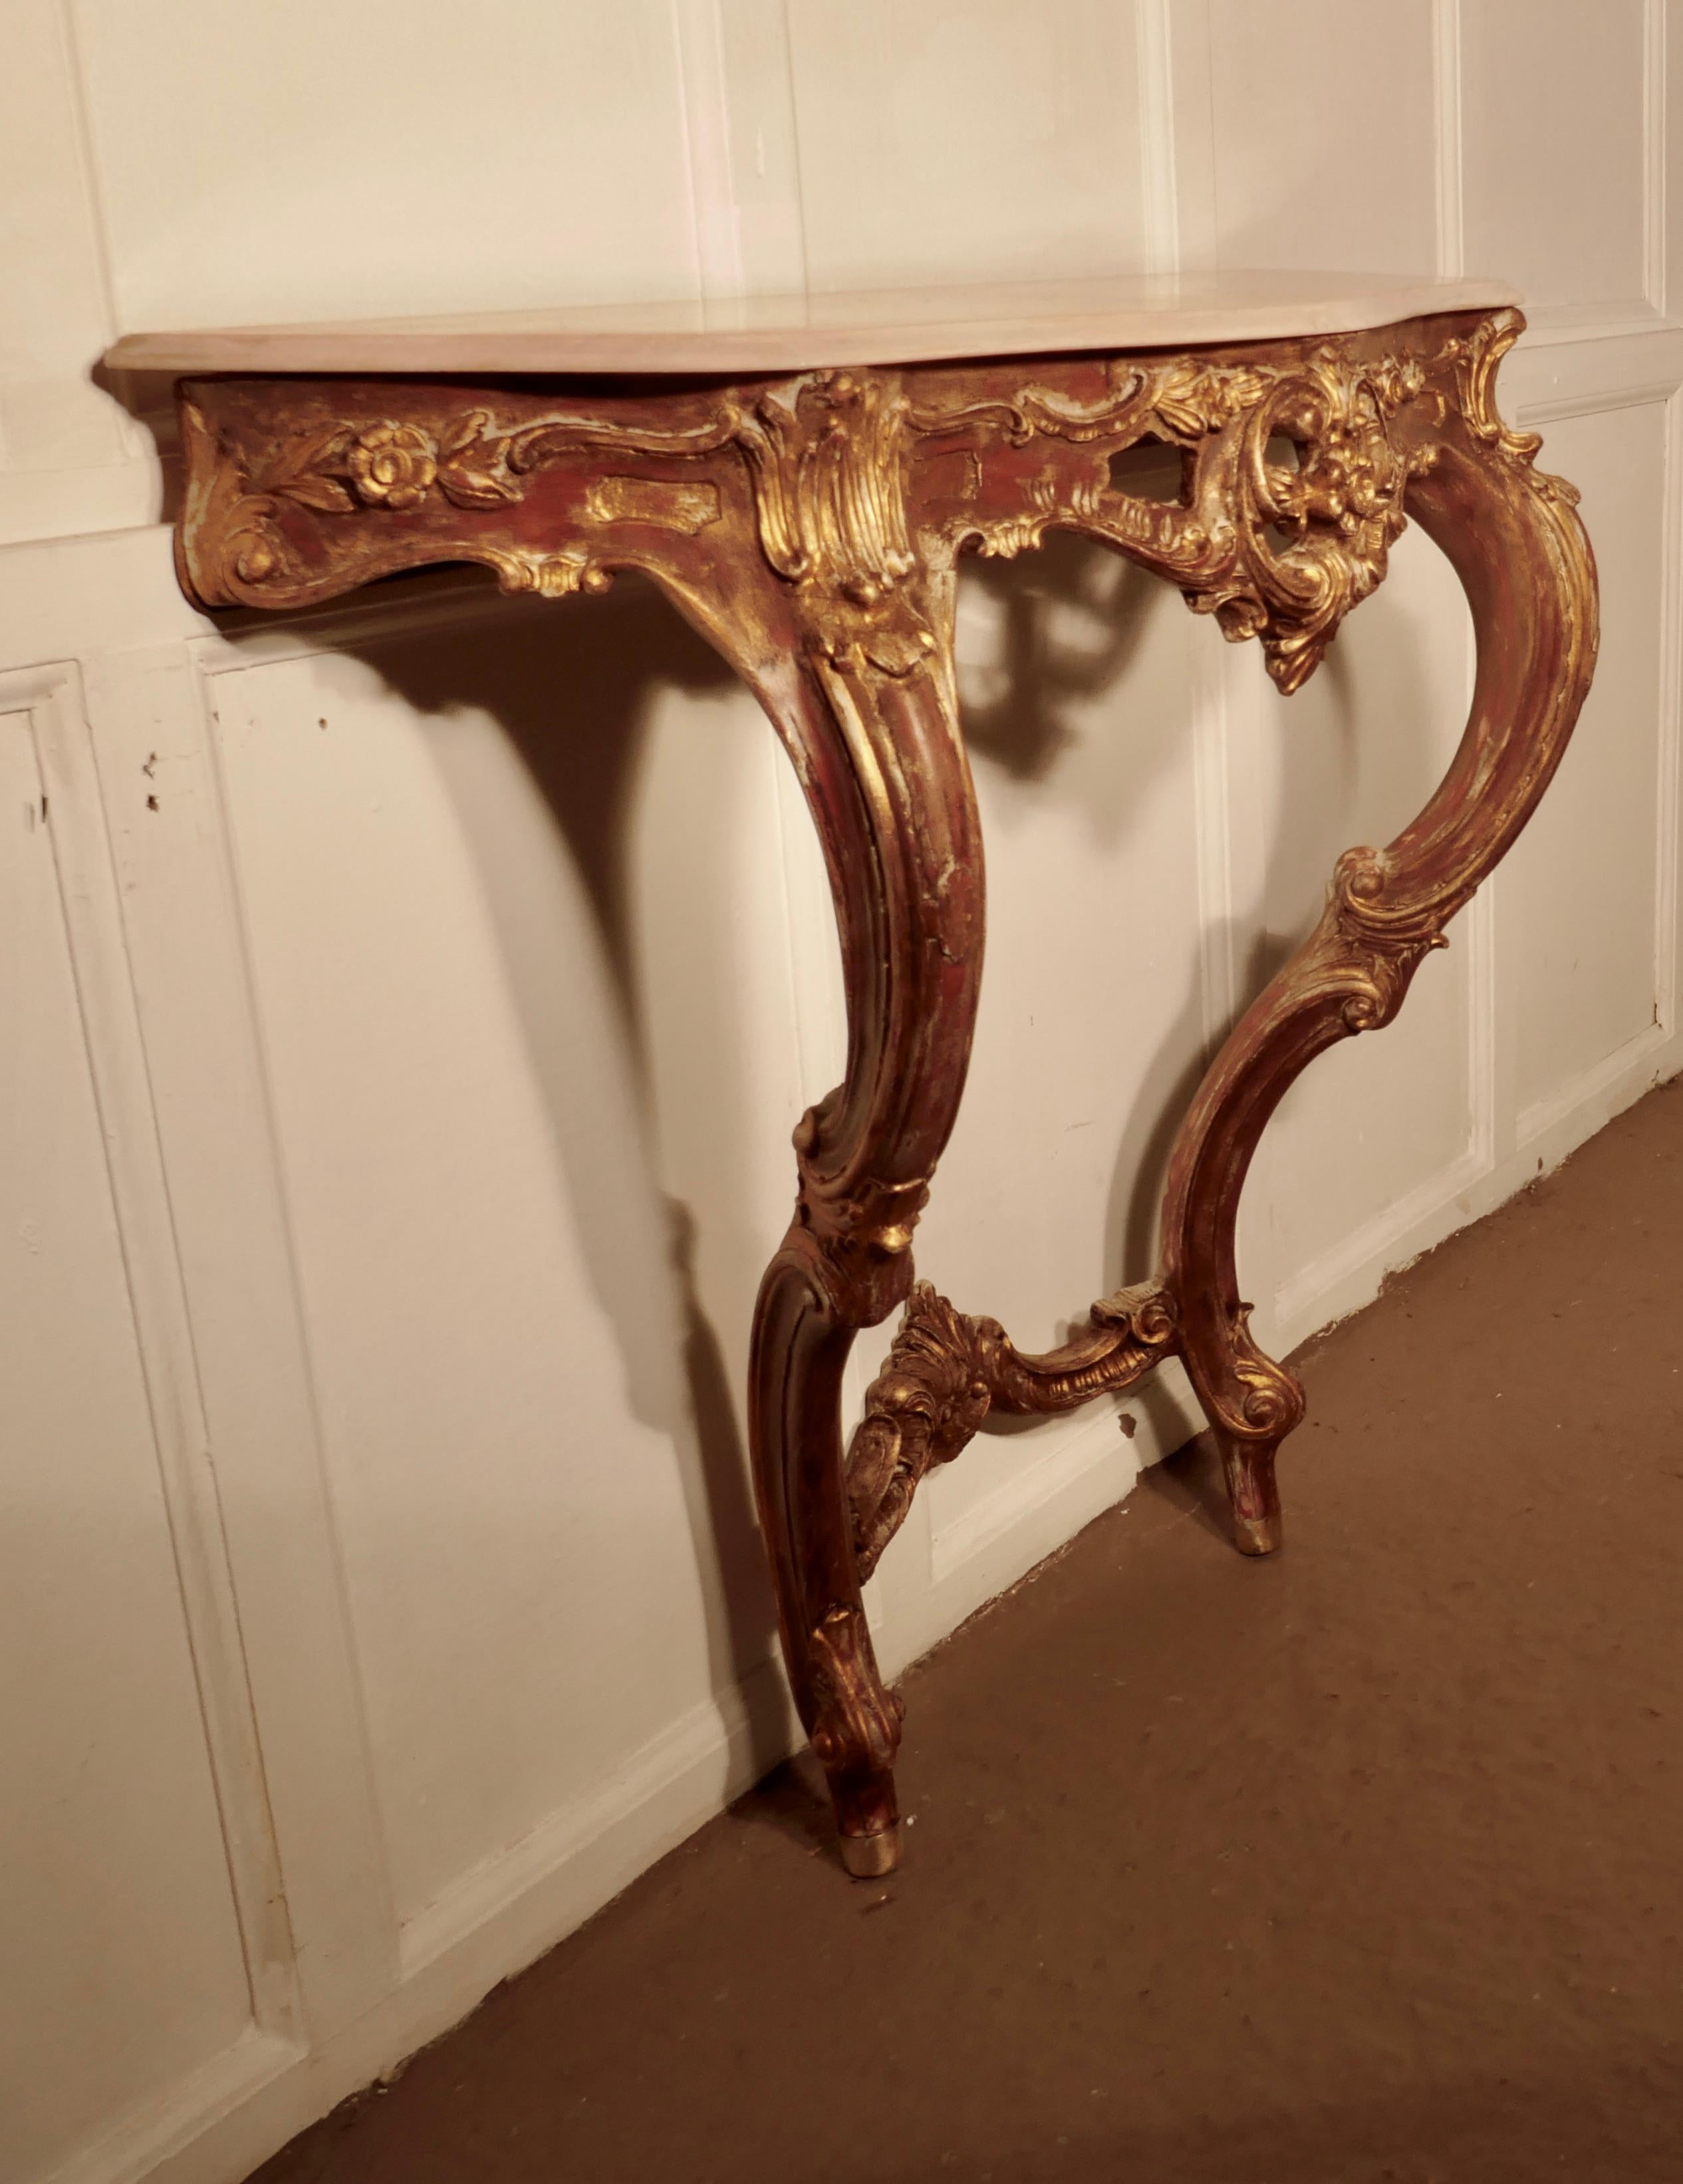 Old French gilt console or hall table

This is a very attractive piece, the table has decorative scroll and shell decoration, both to the legs and to the freeze
The tabletop is a scalloped shape with a moulded edge to carry the peach colored